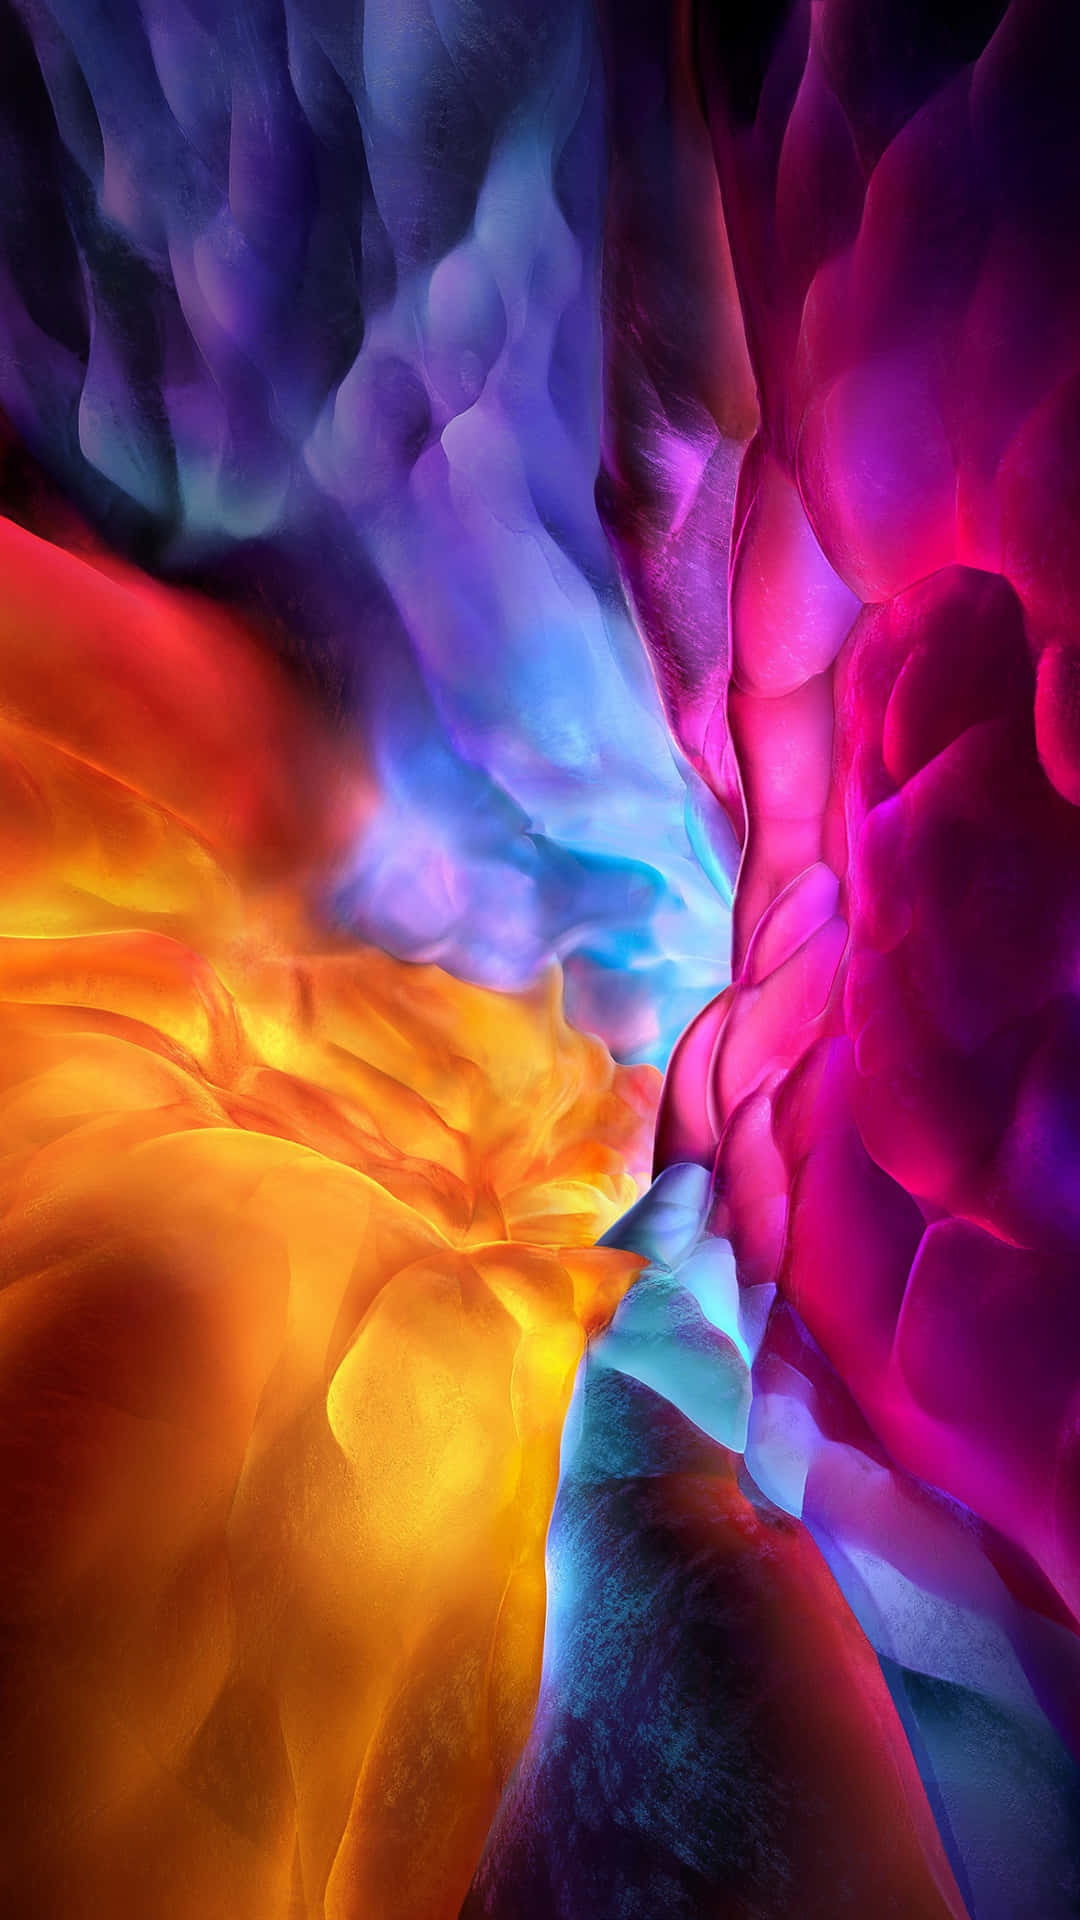 Simply stunning. The iconic Ipad default wallpaper. Wallpaper